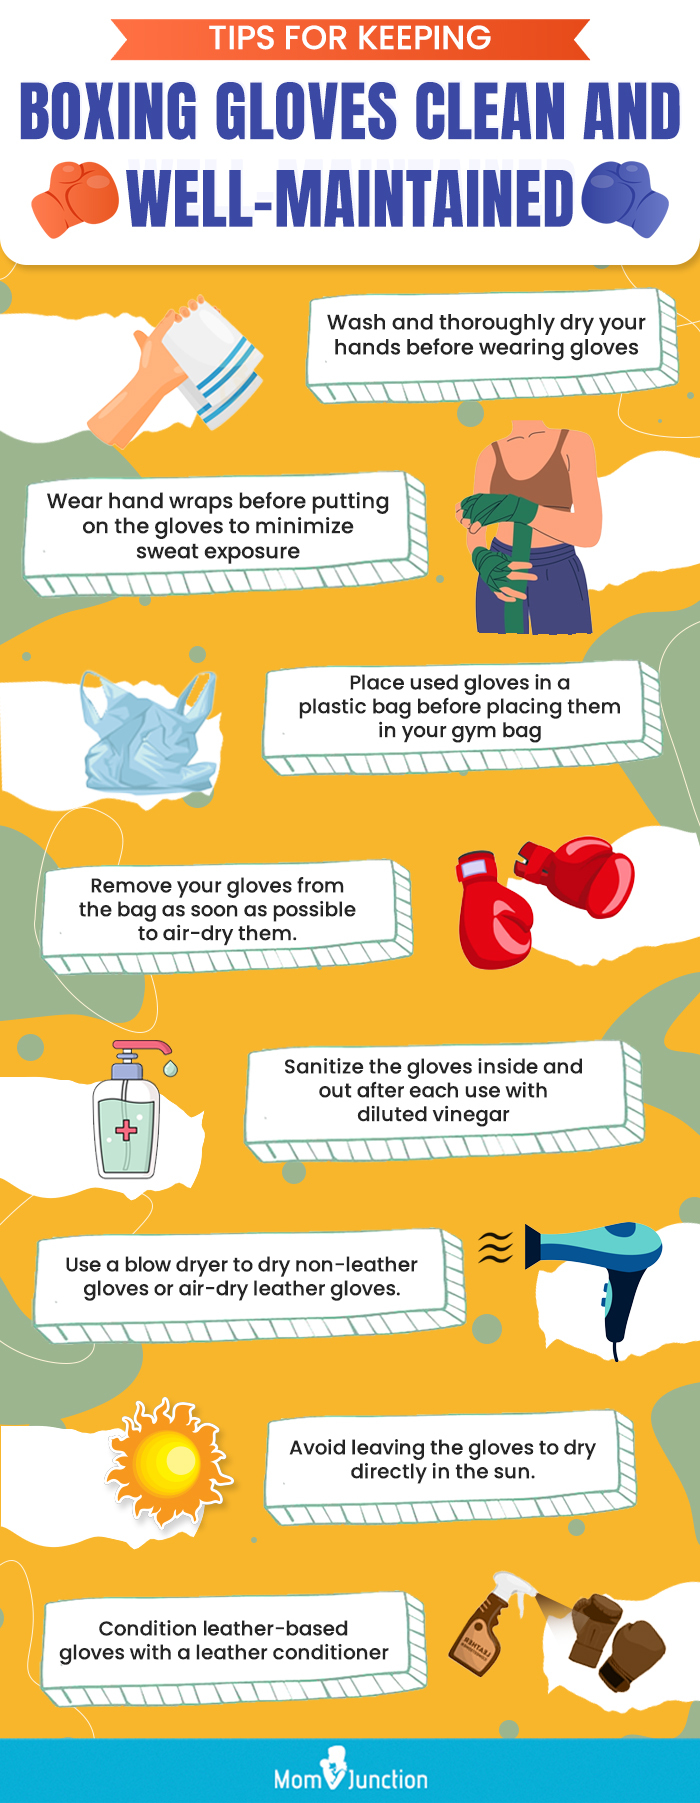 Tips For Keeping Boxing Gloves Clean And Well Maintained (infographic)